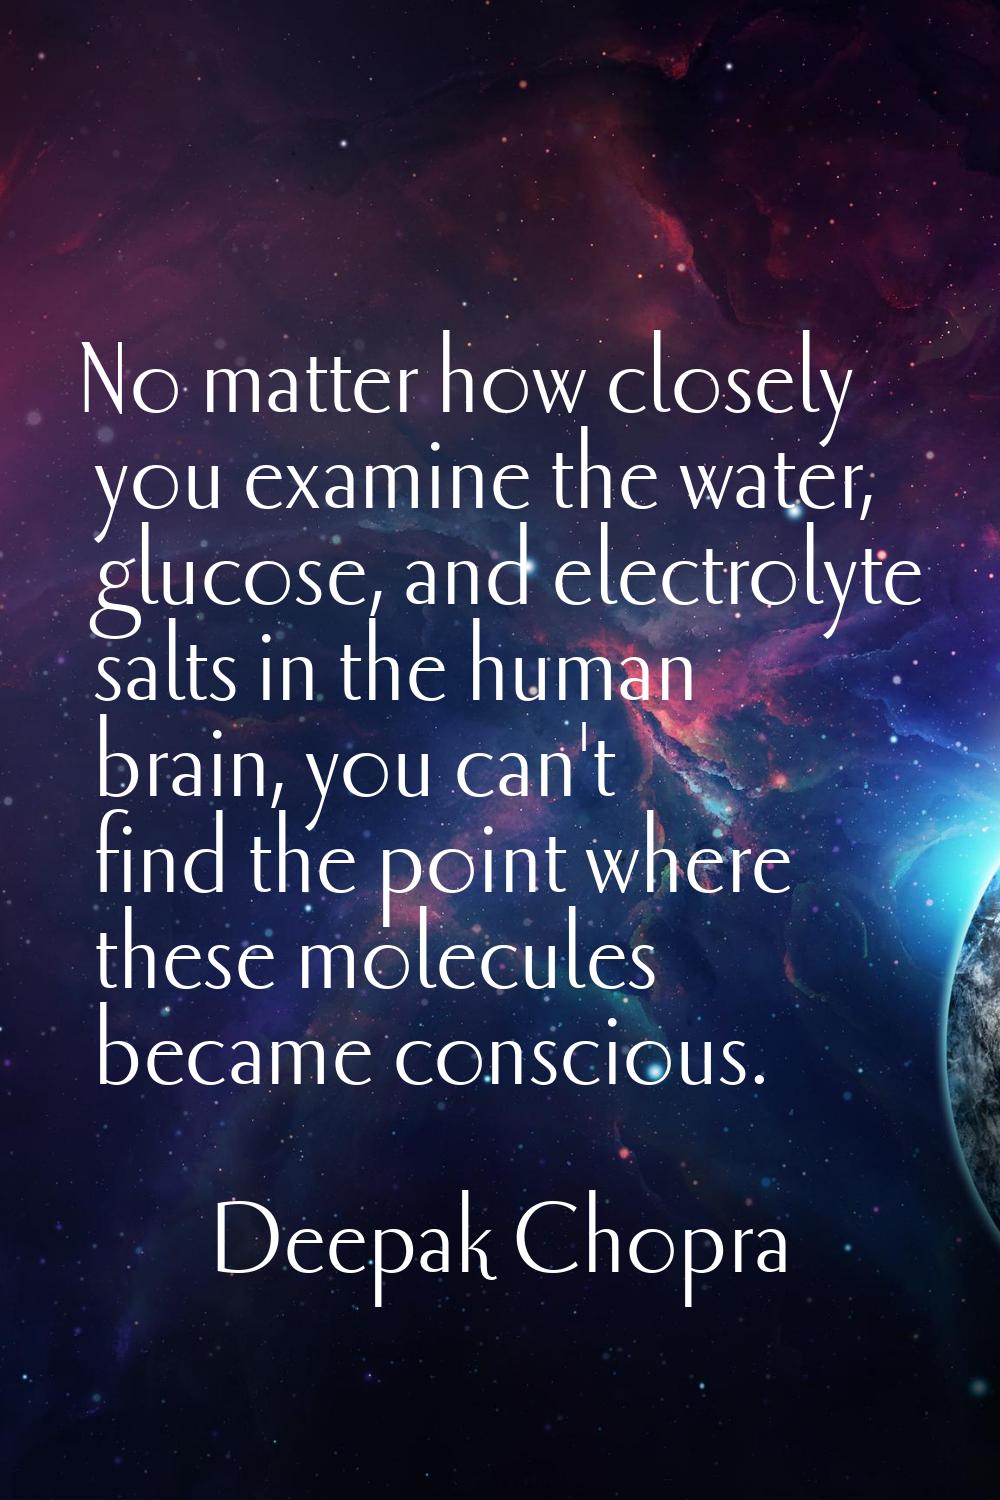 No matter how closely you examine the water, glucose, and electrolyte salts in the human brain, you